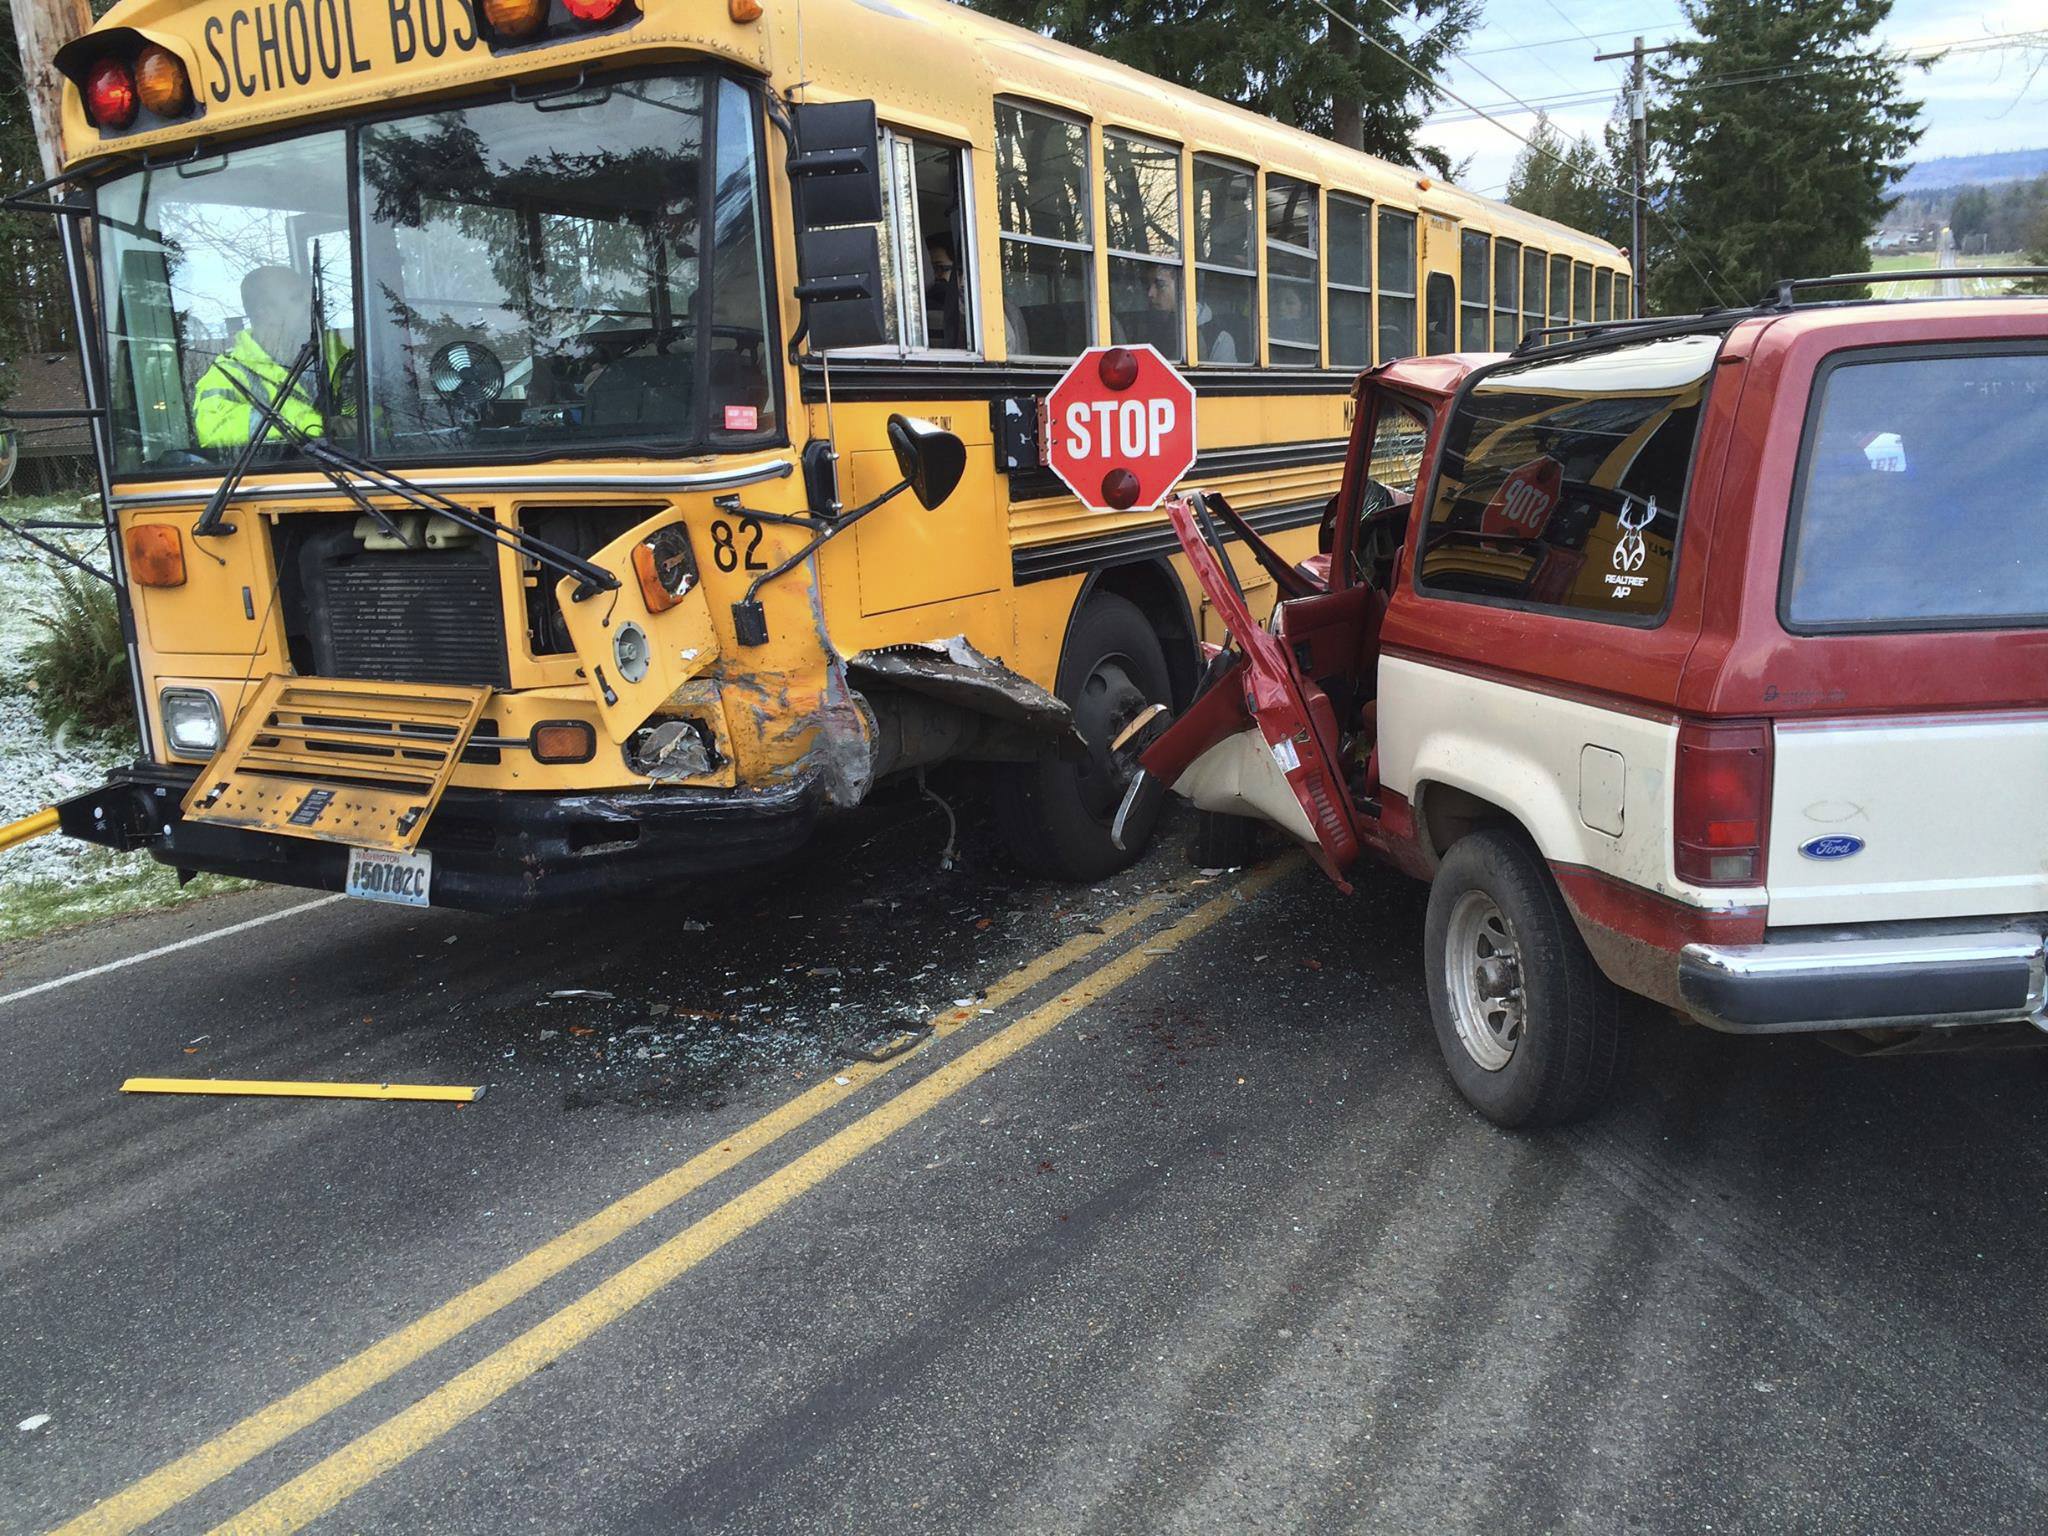 SUV, school bus collide                                Snohomish County deputies are asking for the public’s help to locate a hit-and-run driver who crashed into a school bus at about 2:45 p.m. Thursday at 108th St. NE and 78th Avenue NE when the students were being dropped off. The bus driver and suspect sustained injuries, deputies reported. No children were hurt. Deputies said the suspect fled on foot with obvious facial injuries, and abandoned the white-and-red SUV with Montana plate 430844B. The suspect is a white man with a shaved head, in his 30s, wearing tan Carhartt pants and jacket, skull rings on his fingers, a bullet necklace, and a diamond earring. Anyone with information should call 911.